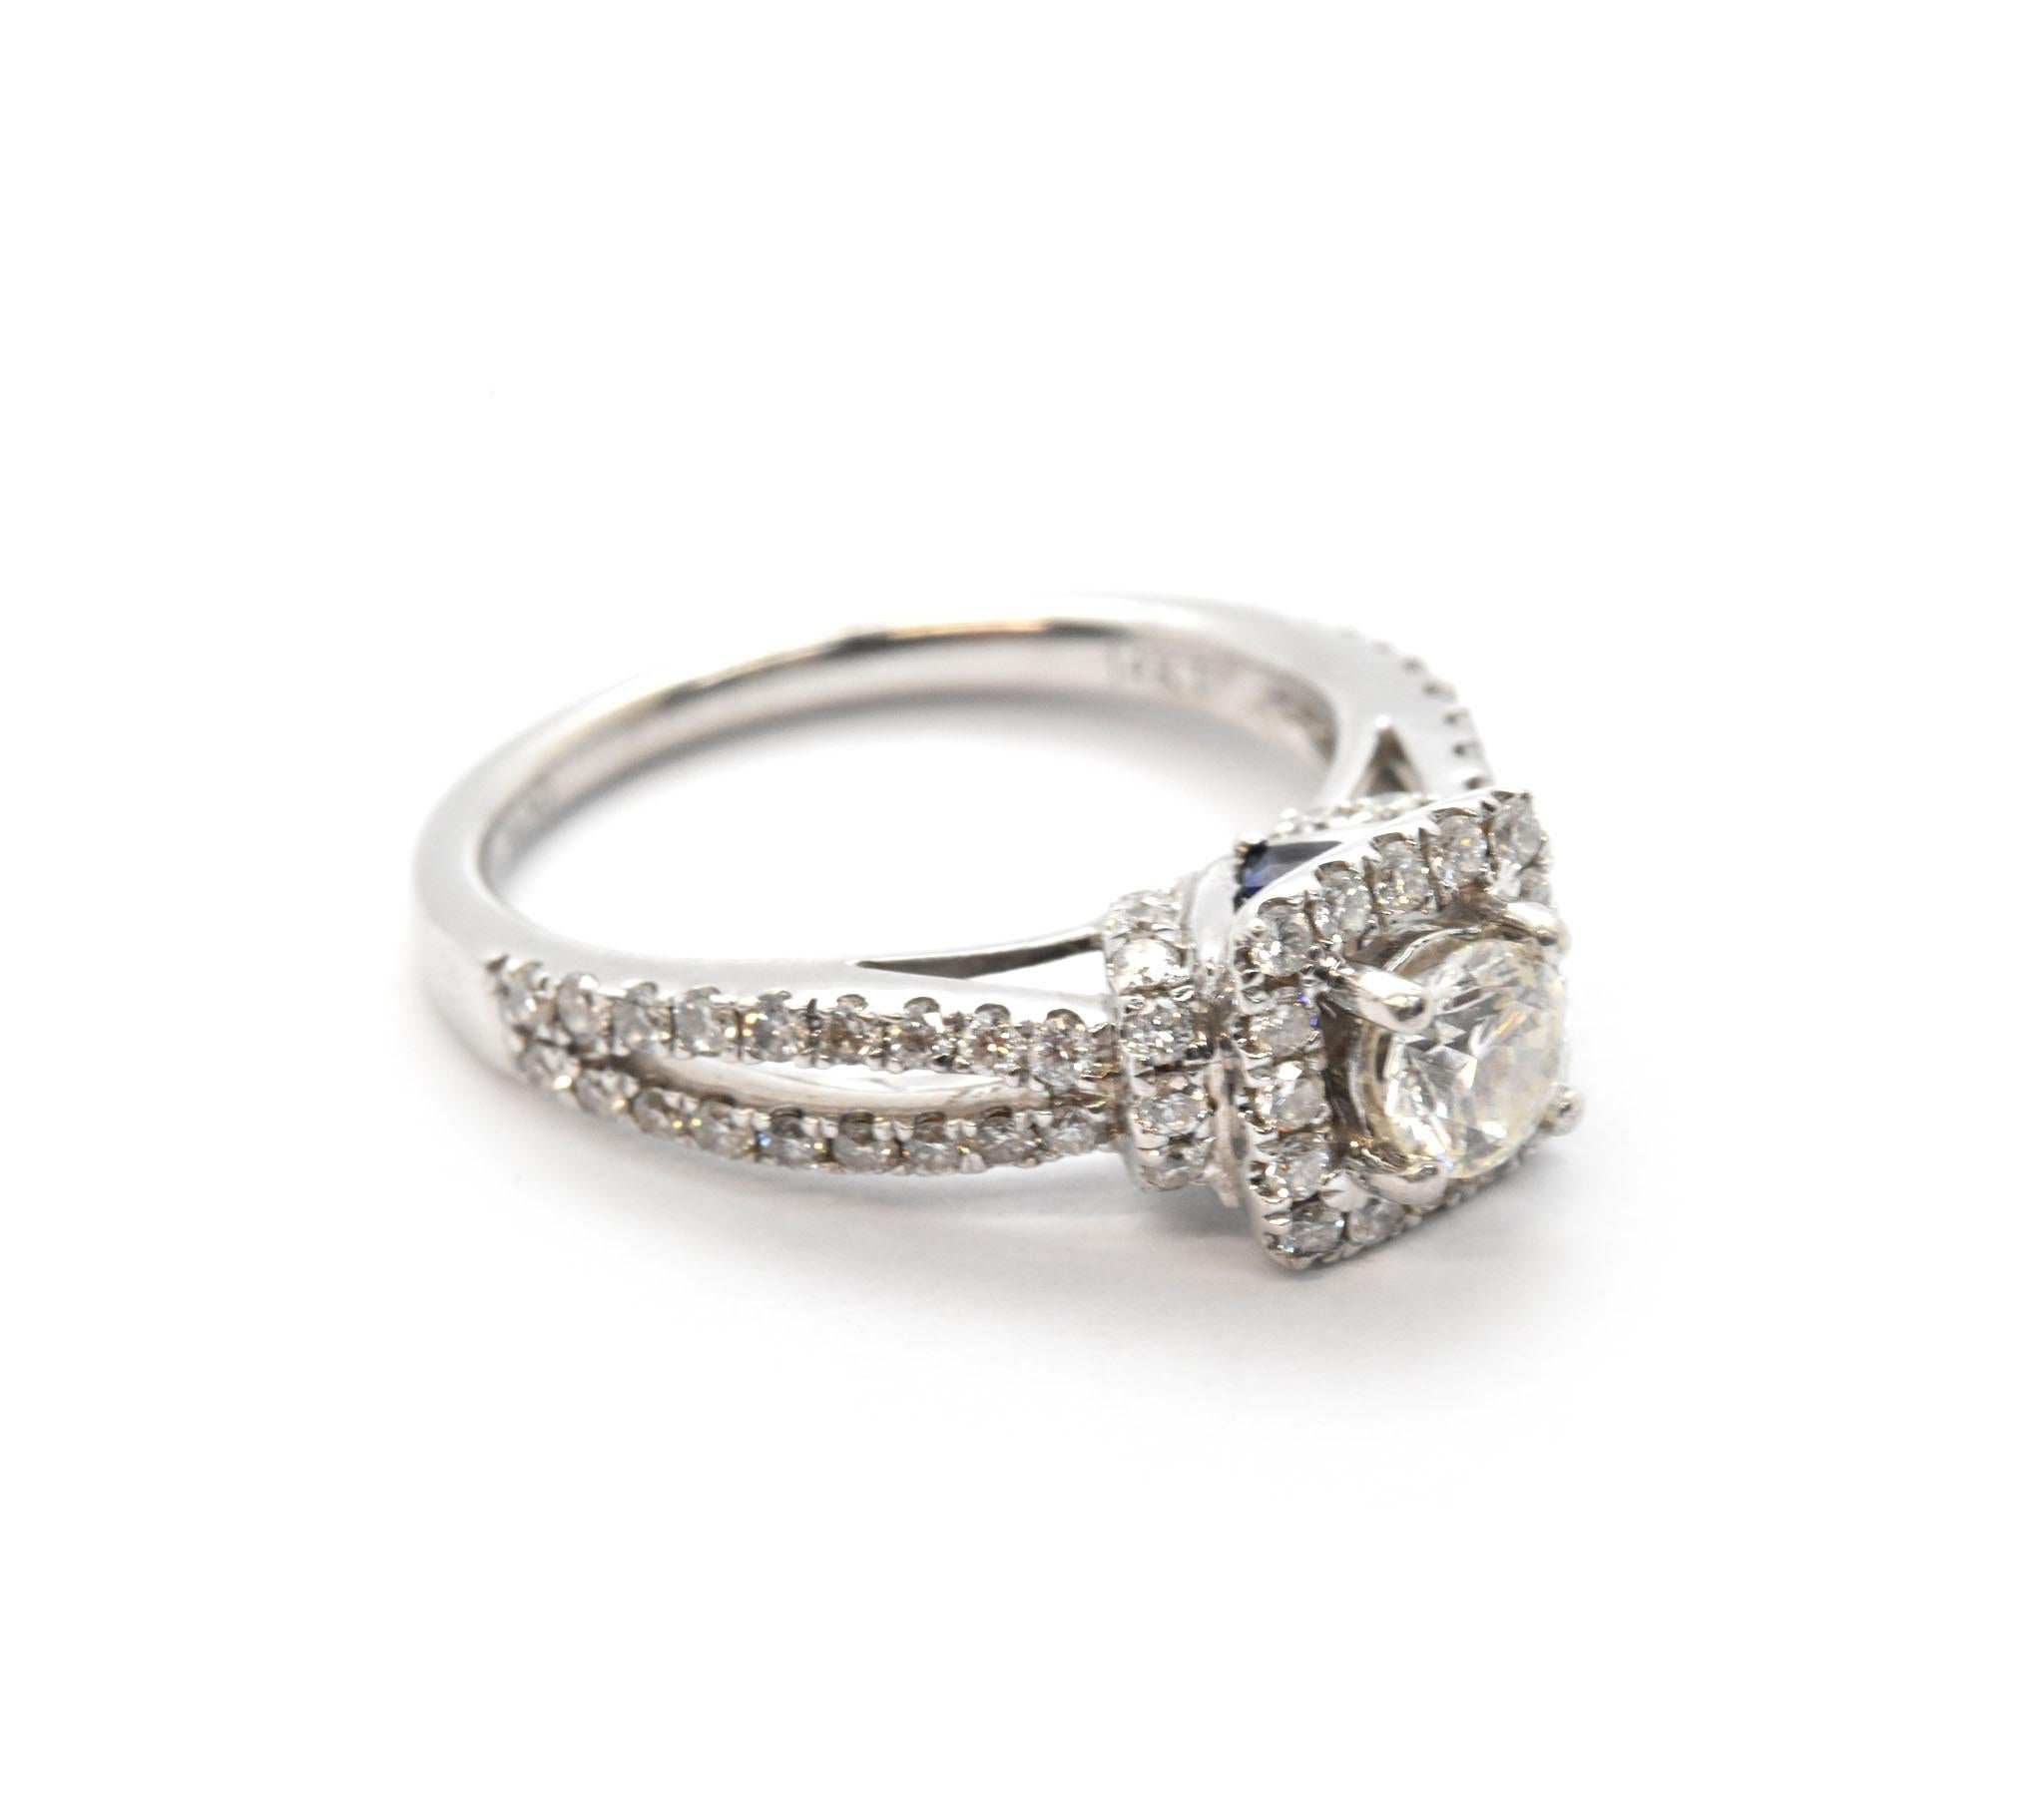 This is a charming 14k white gold engagement ring from the Vera Wang “Love” Collection. This ring delights with the round brilliant 0.38ct center diamond with a graceful diamond halo! The center diamond is graded I color and SI clarity. A total of